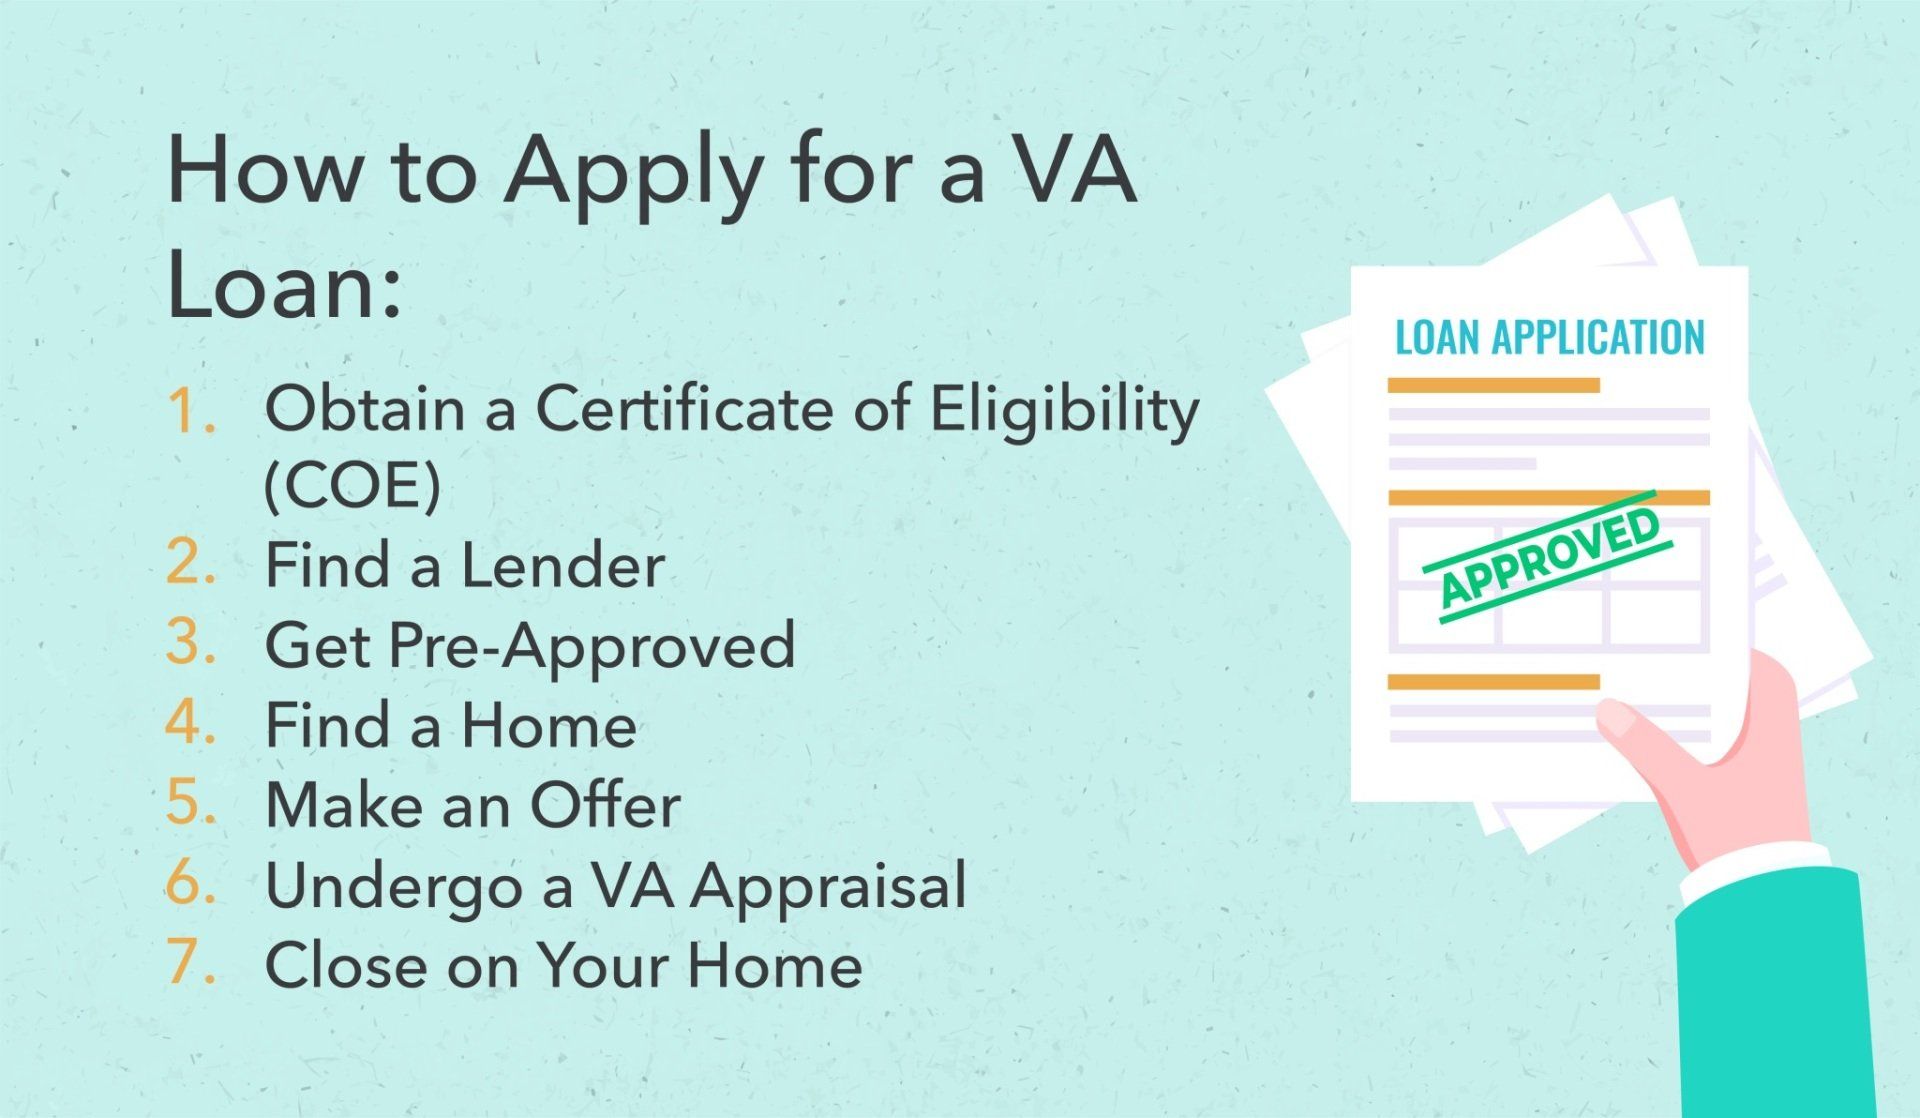 How to apply for a va loan image